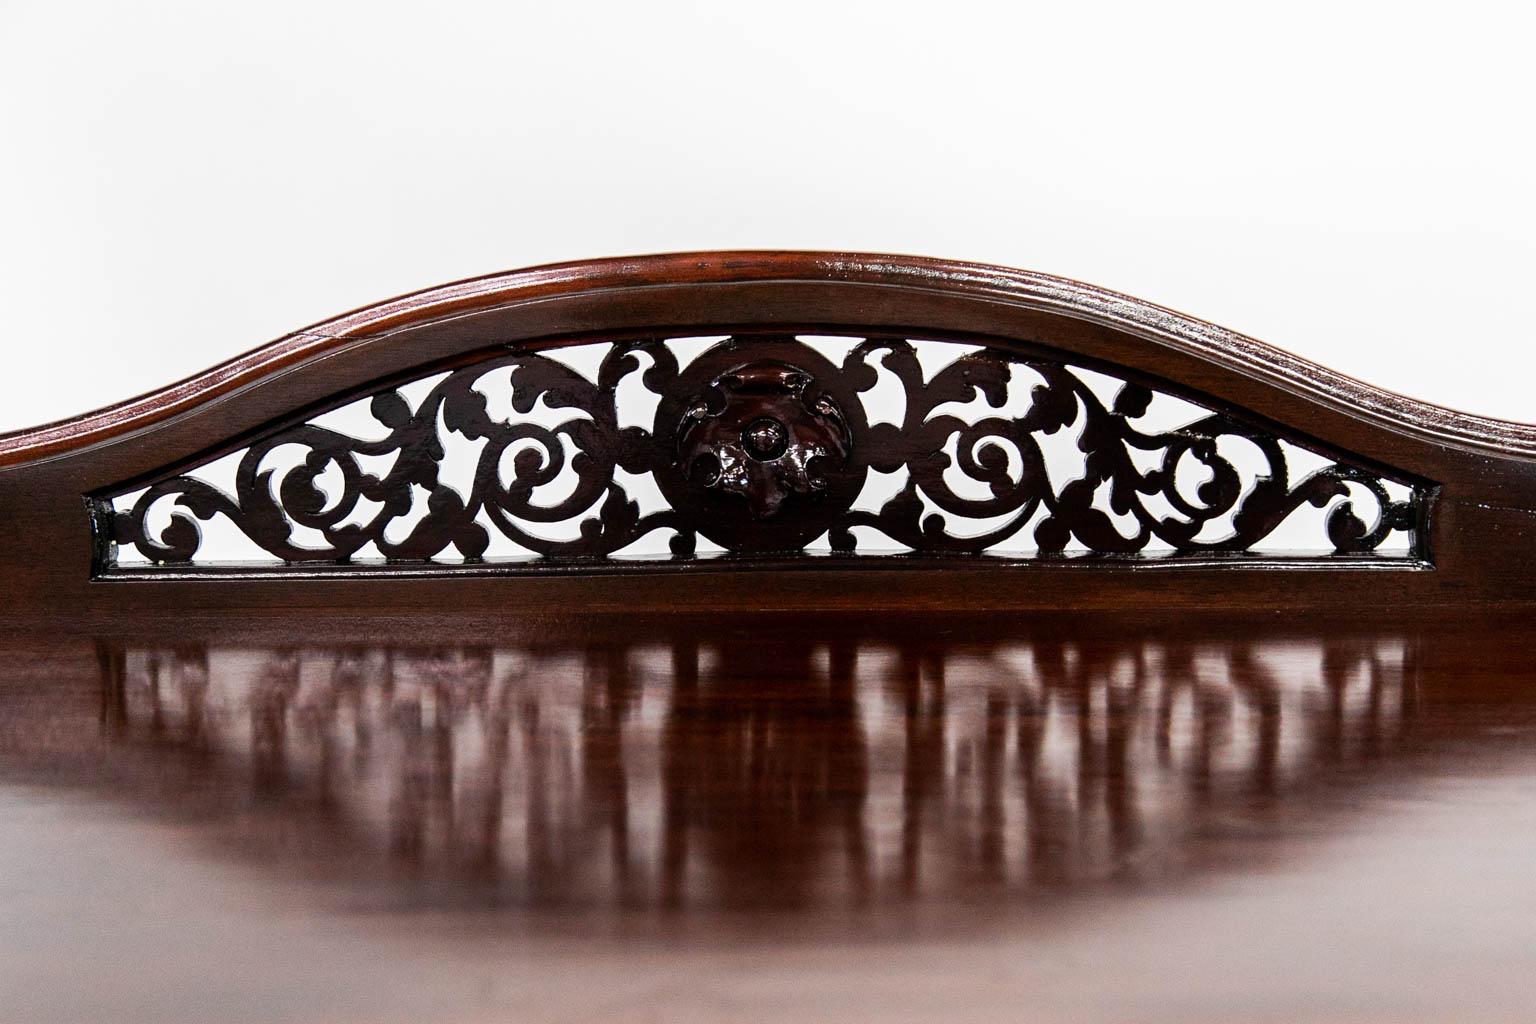 The top shelf of this server has a serpentine crest rail with an open pierced carved center. All three shelves in the crest rail have ogee molded edges. The lower two shelves have outward flaired galleries. The shelves are supported by tapered